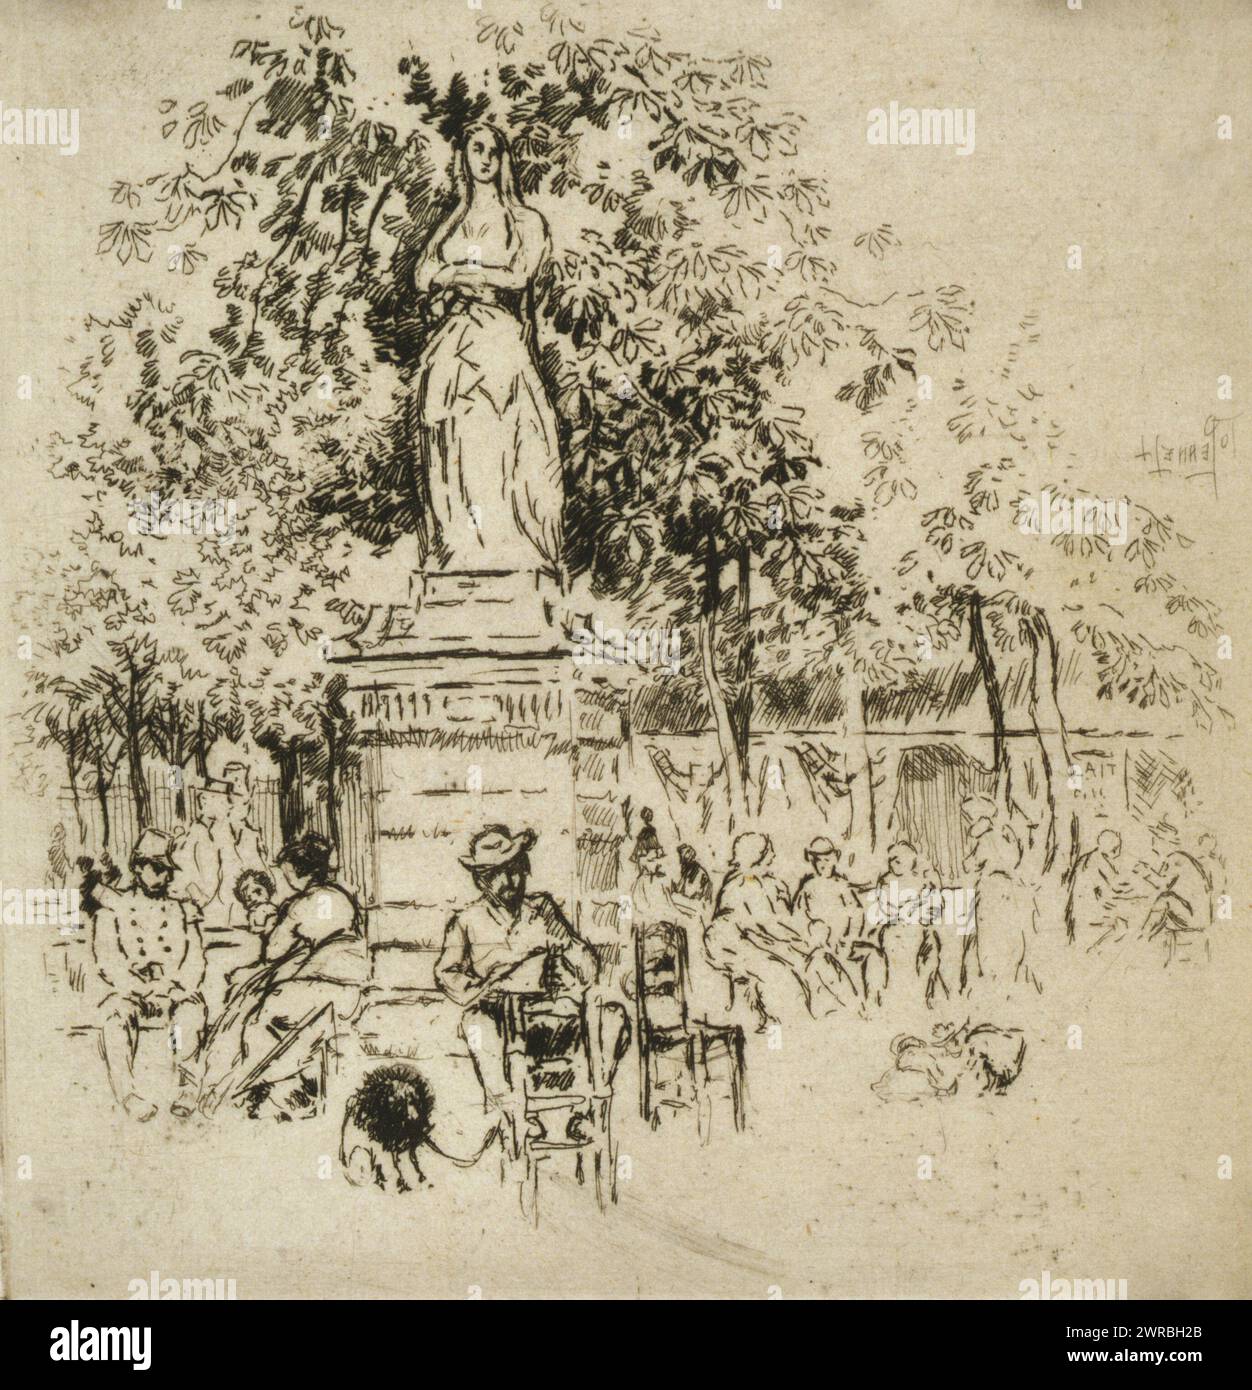 Luxembourg gardens, Jo. Pennell., Print shows a man seated before a statue in the Jardin du Luxembourg, Paris, France., Pennell, Joseph, 1857-1926, artist, 1893, Jardin du Luxembourg (Paris, France), 1890-1900, Etchings, 1890-1900., Proofs, 1890-1900, Etchings, 1890-1900, 1 print: etching Stock Photo